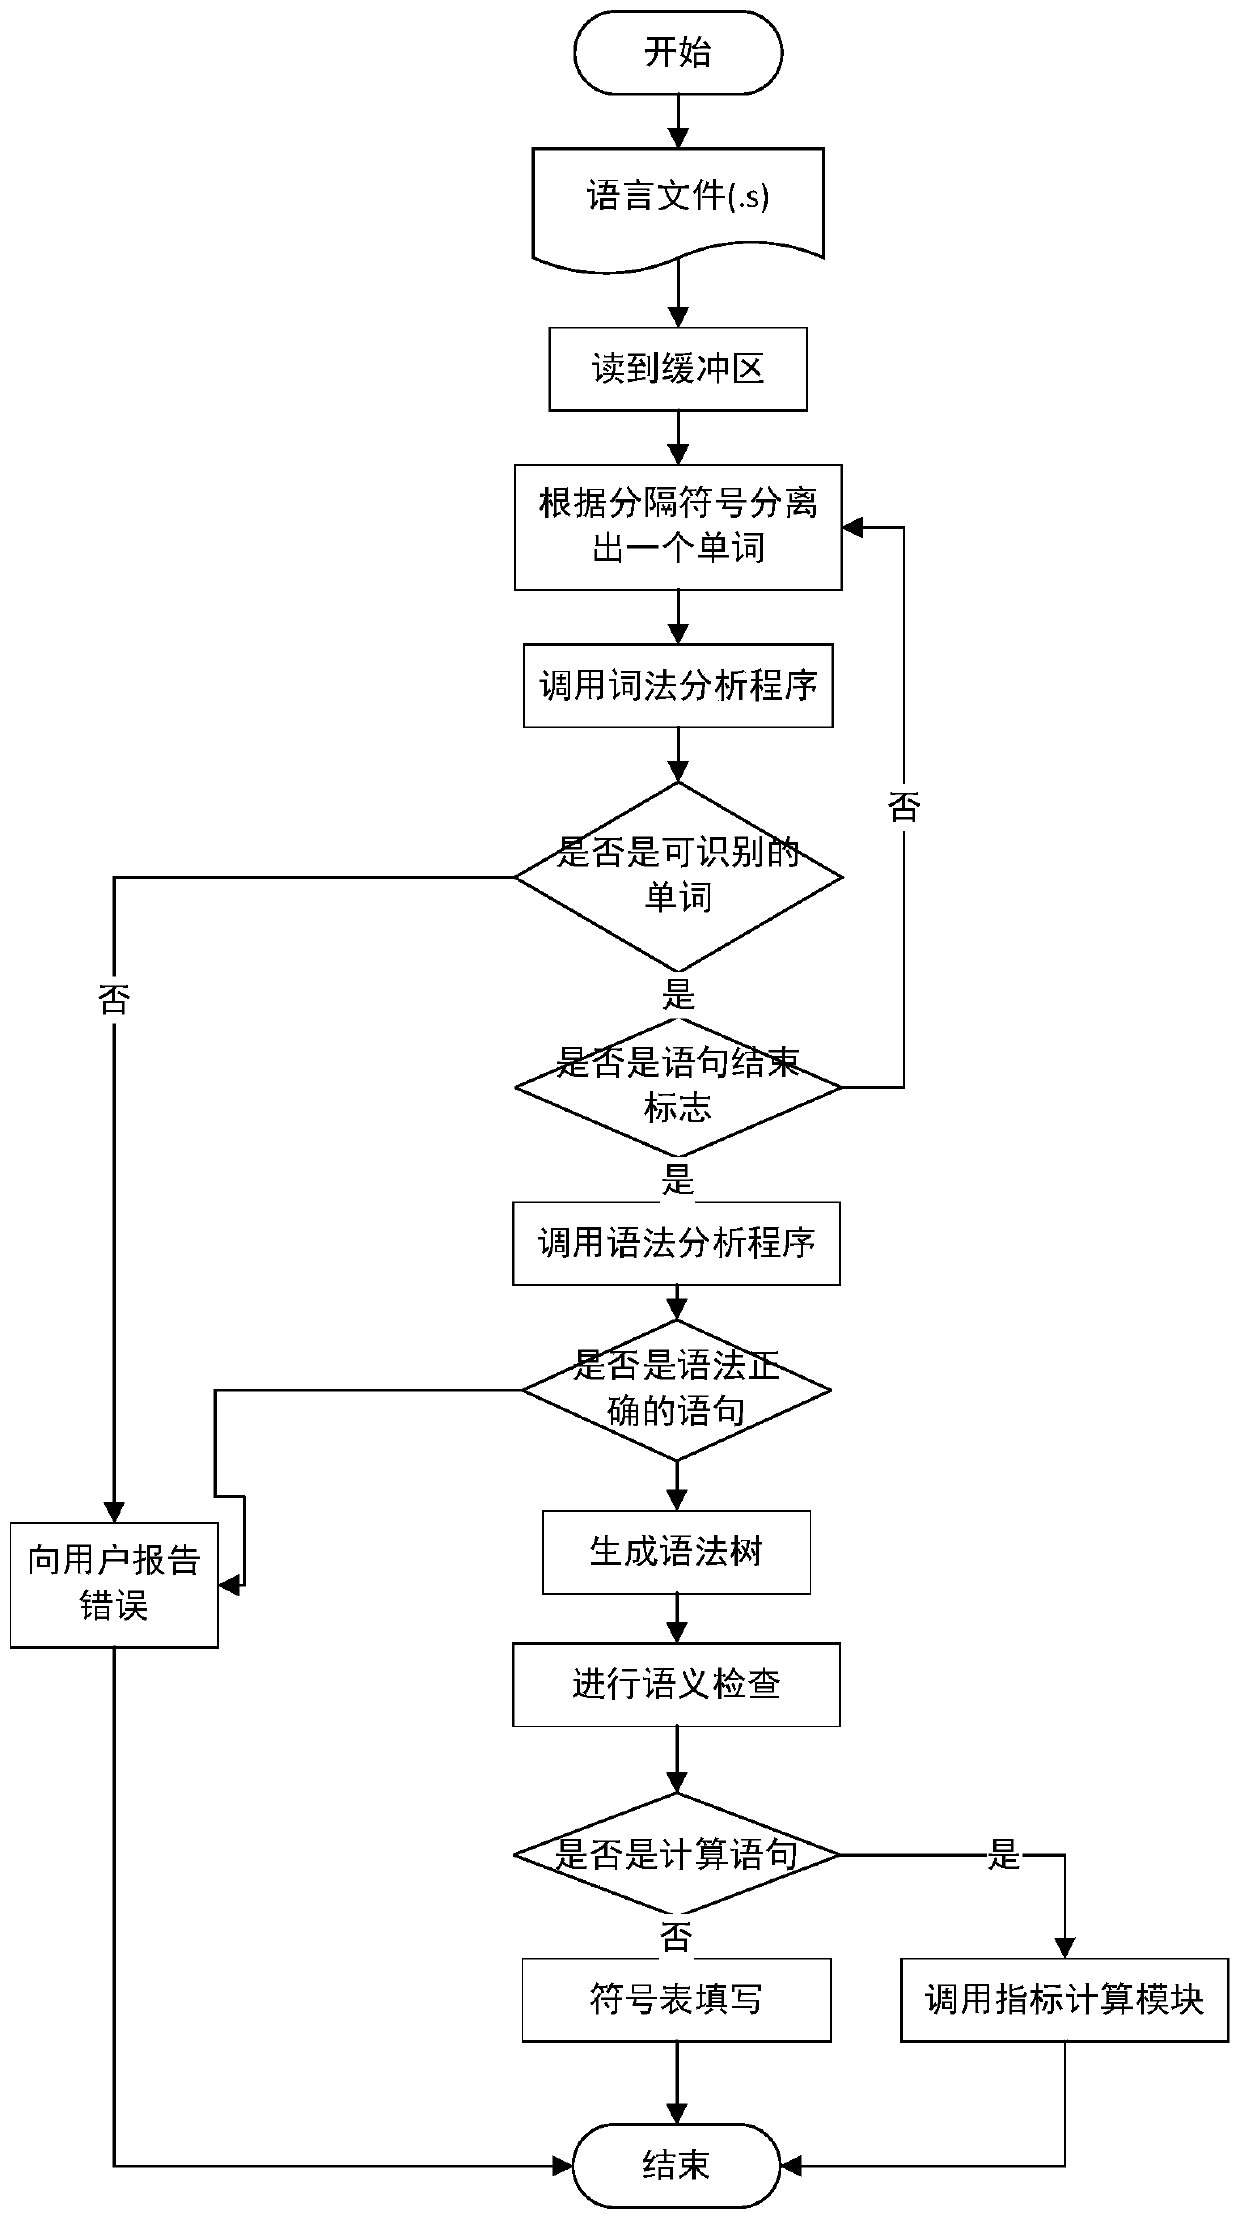 A Domain Specific Language Description System and Method for Taxi Supervision